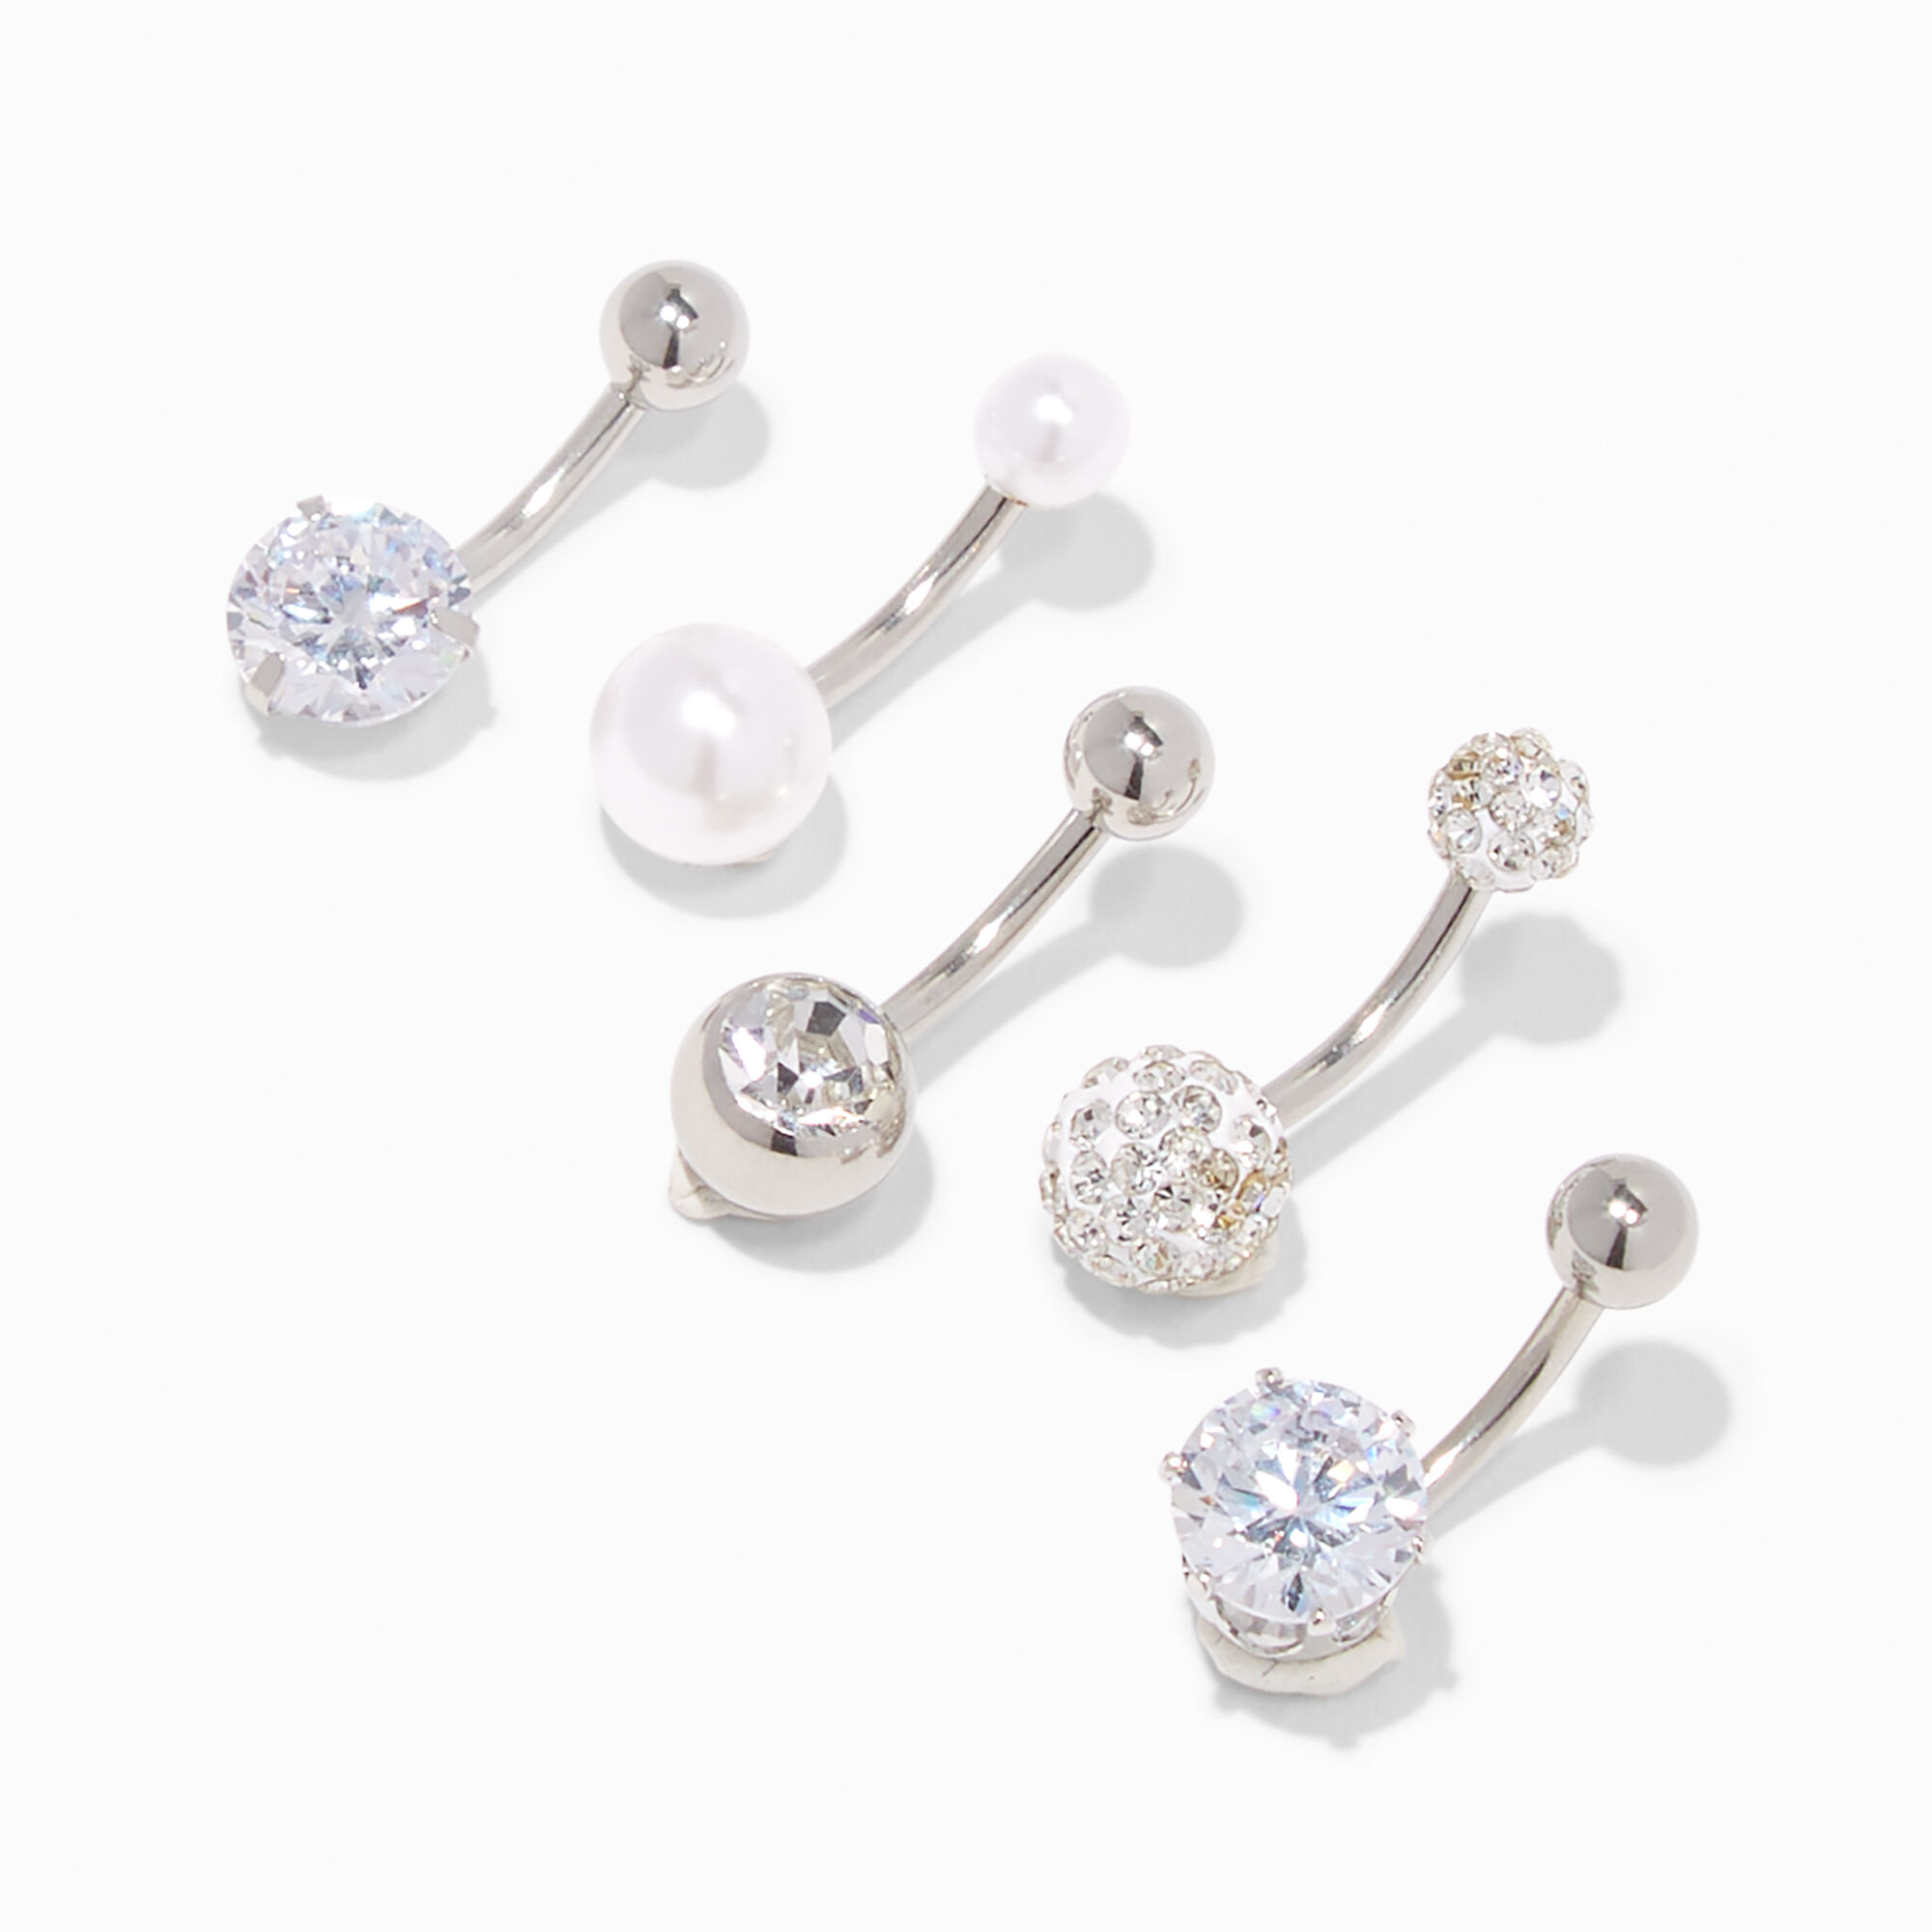 View Claires 14G Luxe Basic Belly Rings 5 Pack Silver information